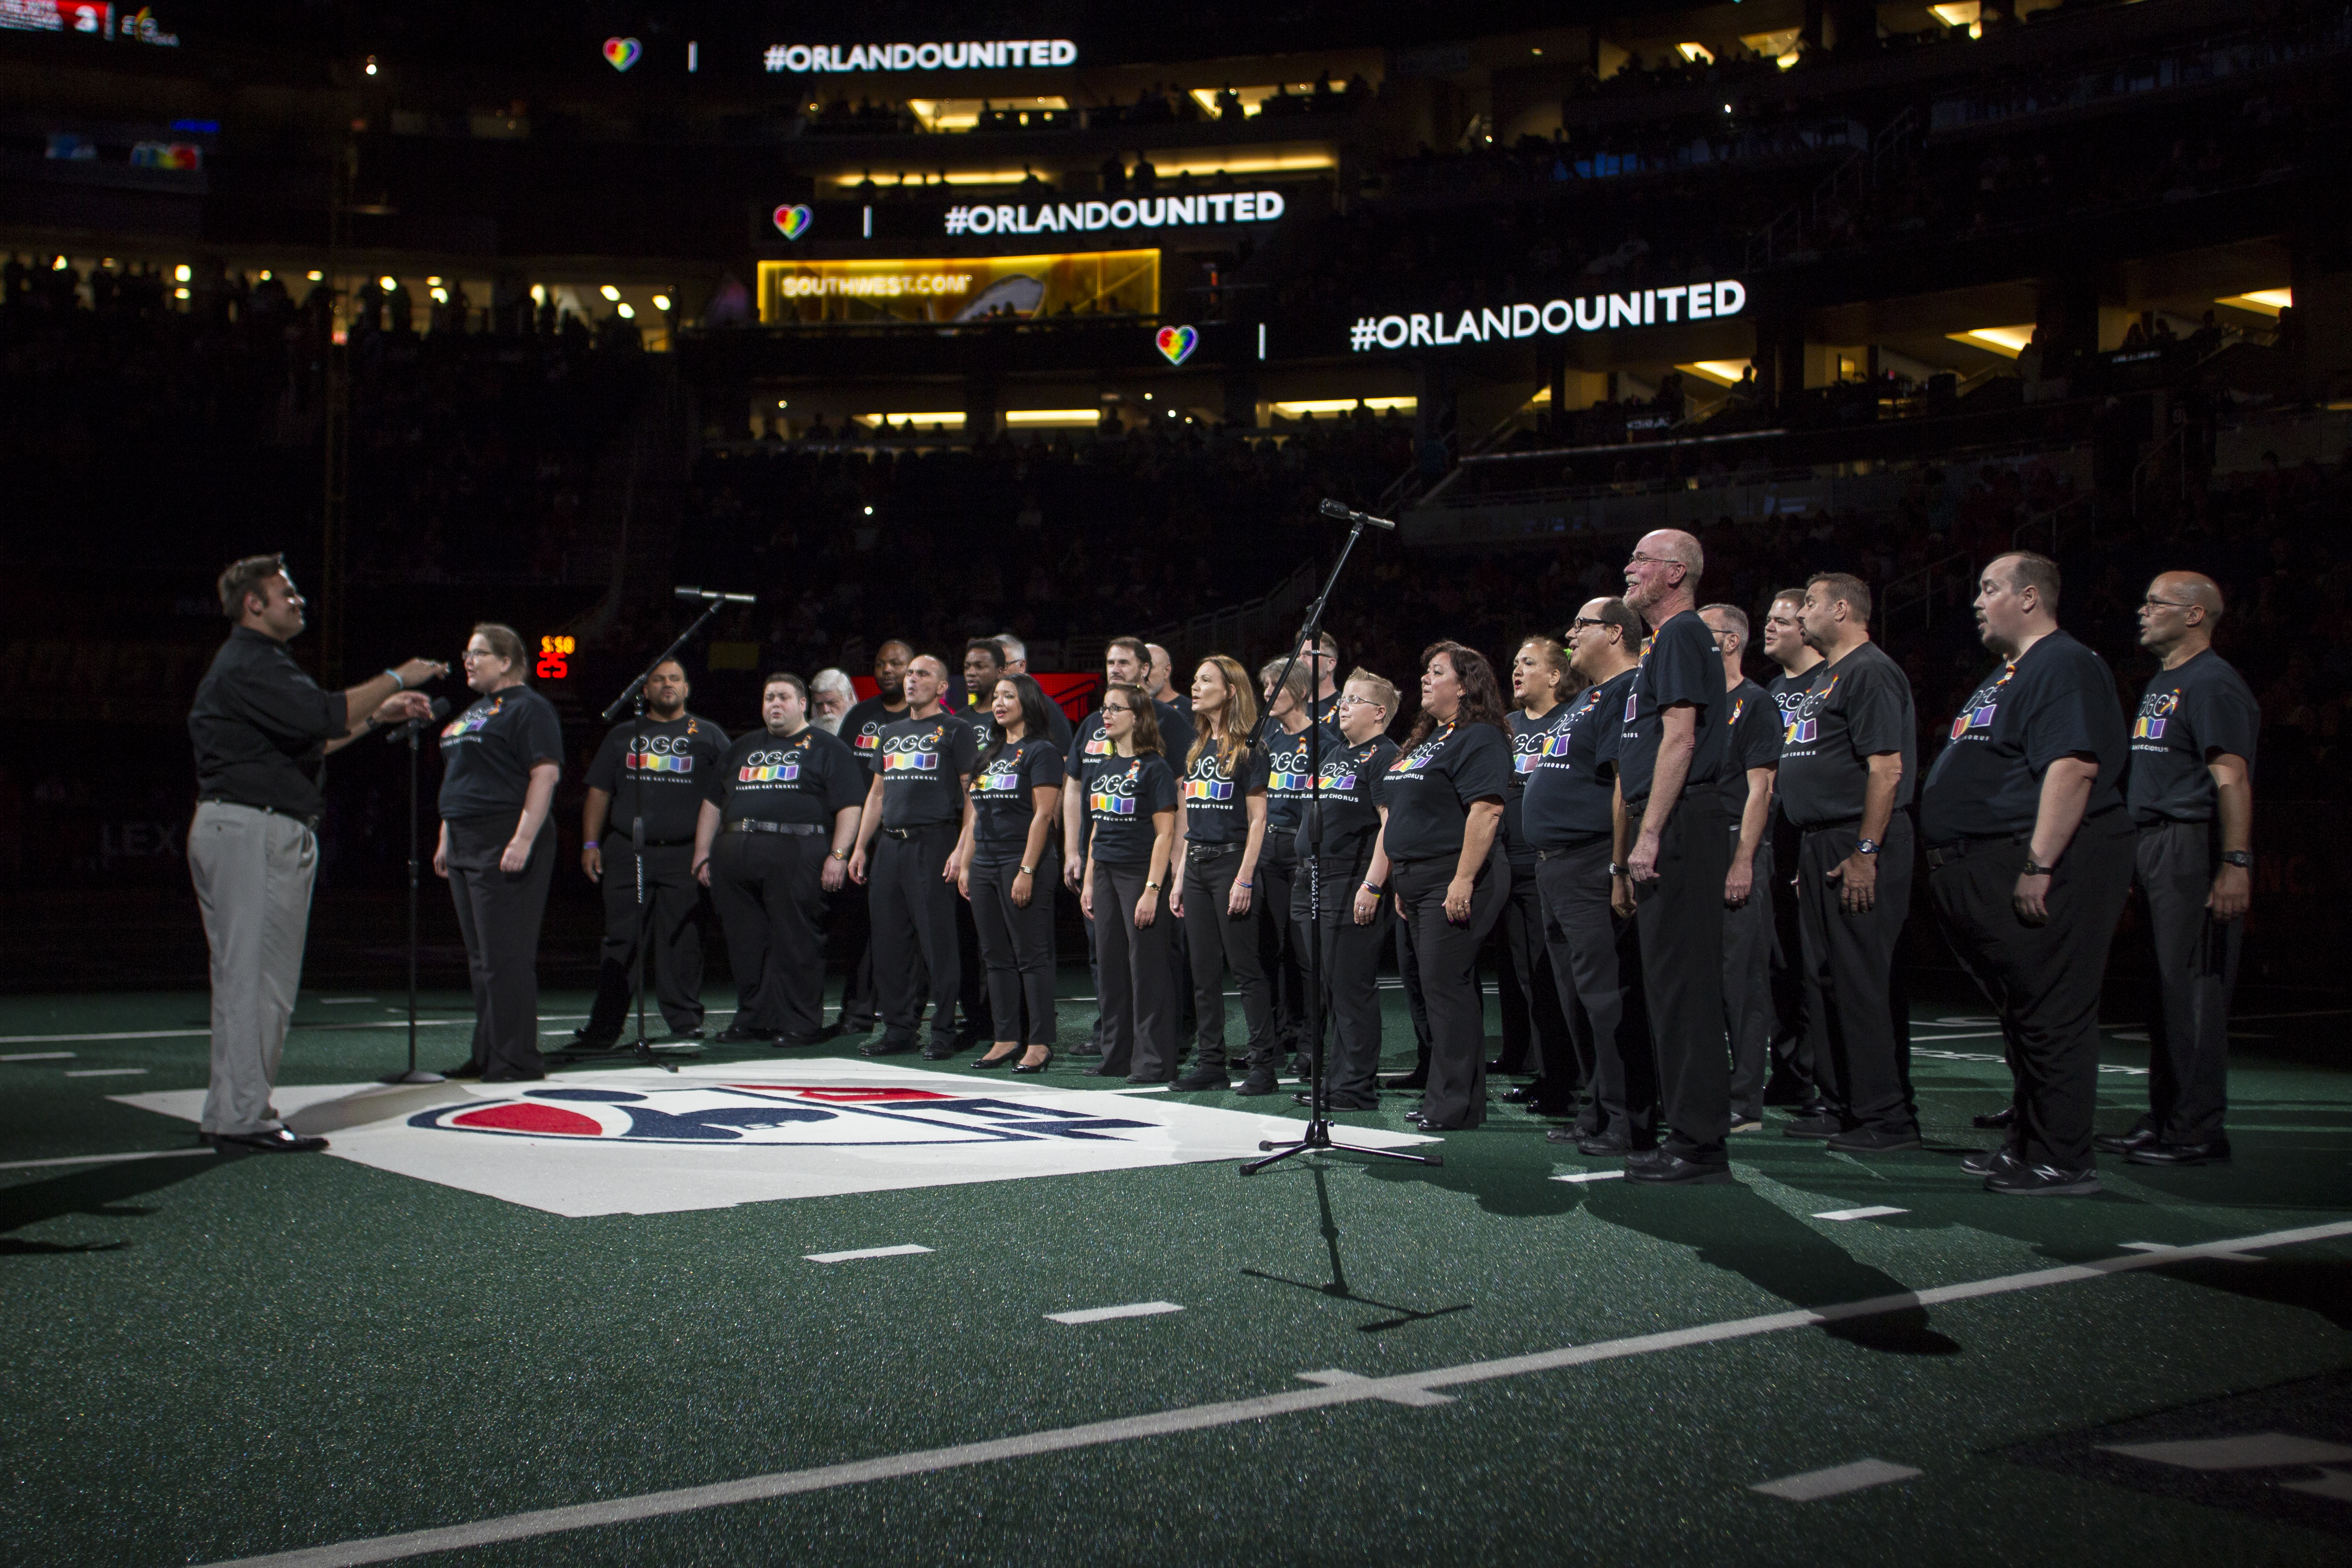 Choir singing in the middle of a stadium